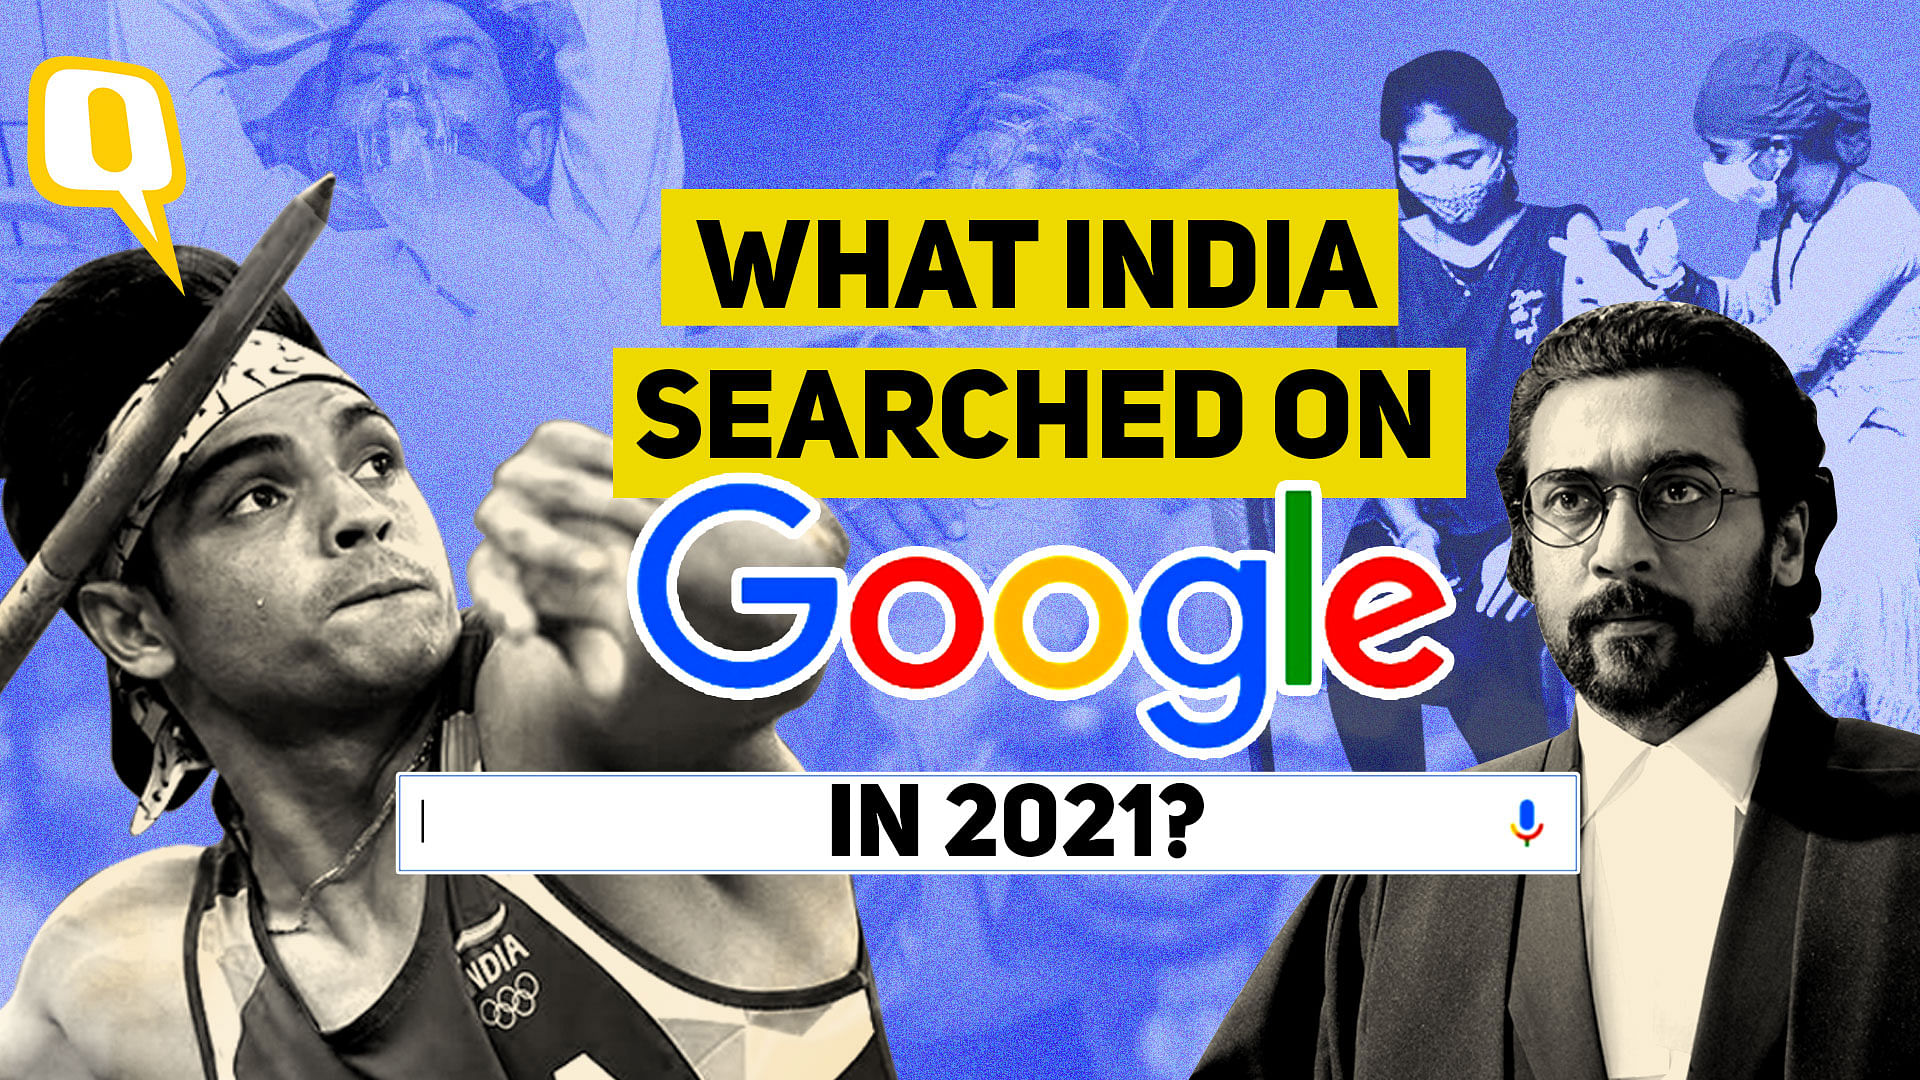 <div class="paragraphs"><p>It will be interesting to check what  Indians searched the most on Google in the eventful year of 2021.</p></div>